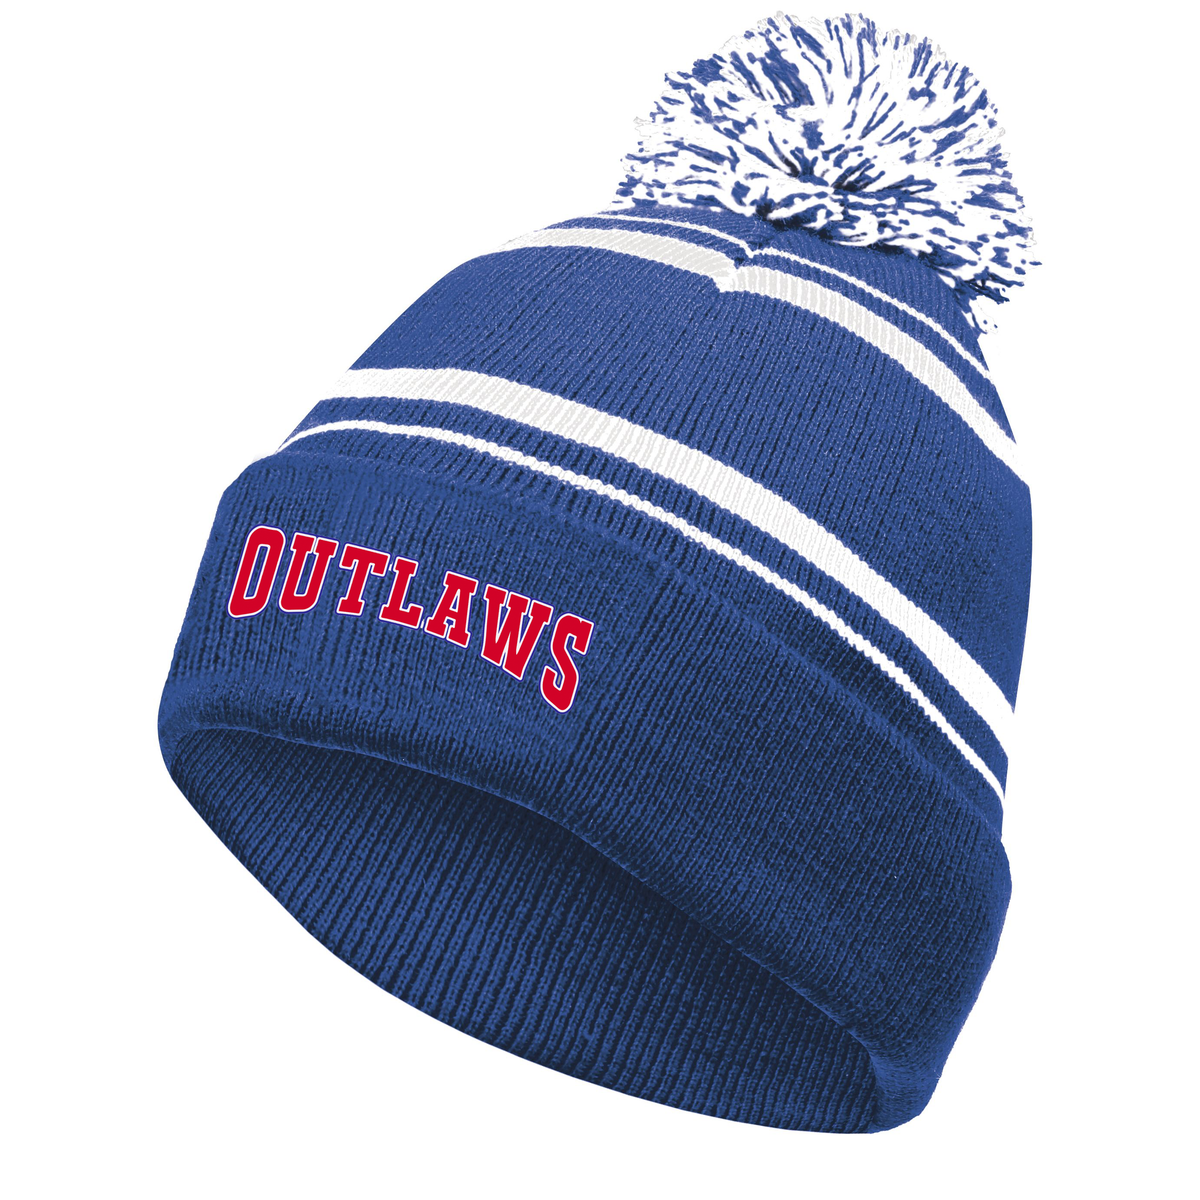 Southern Indiana Outlaws Baseball Homecoming Beanie